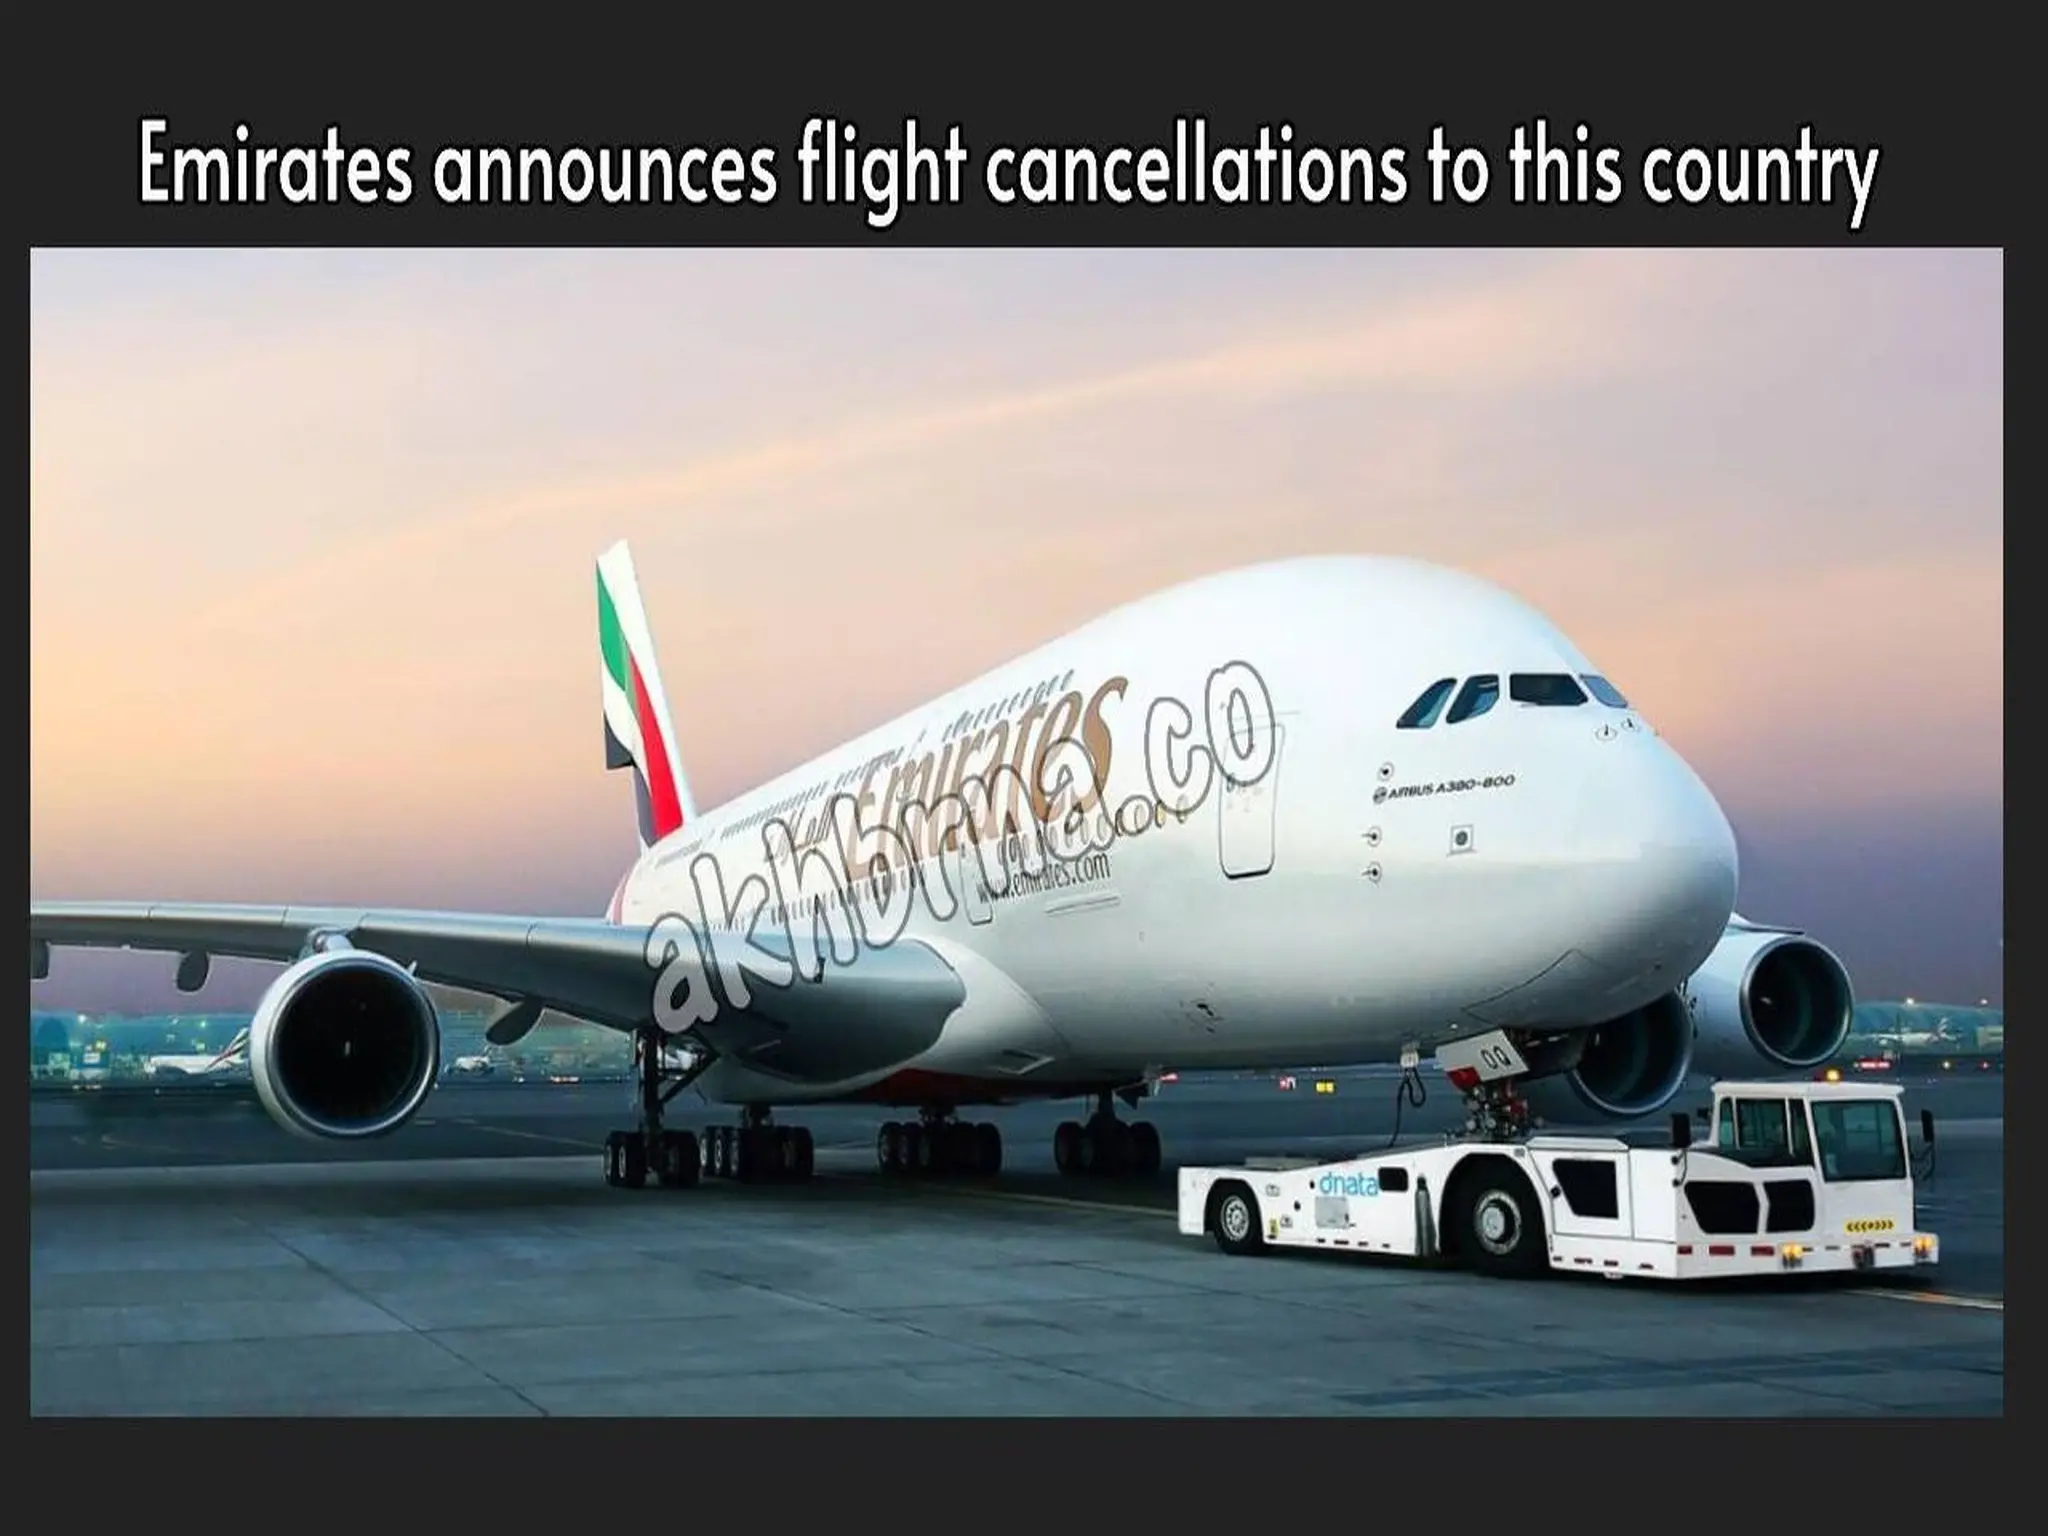 Emirates announces the cancellation of flights to and from this country.. Details